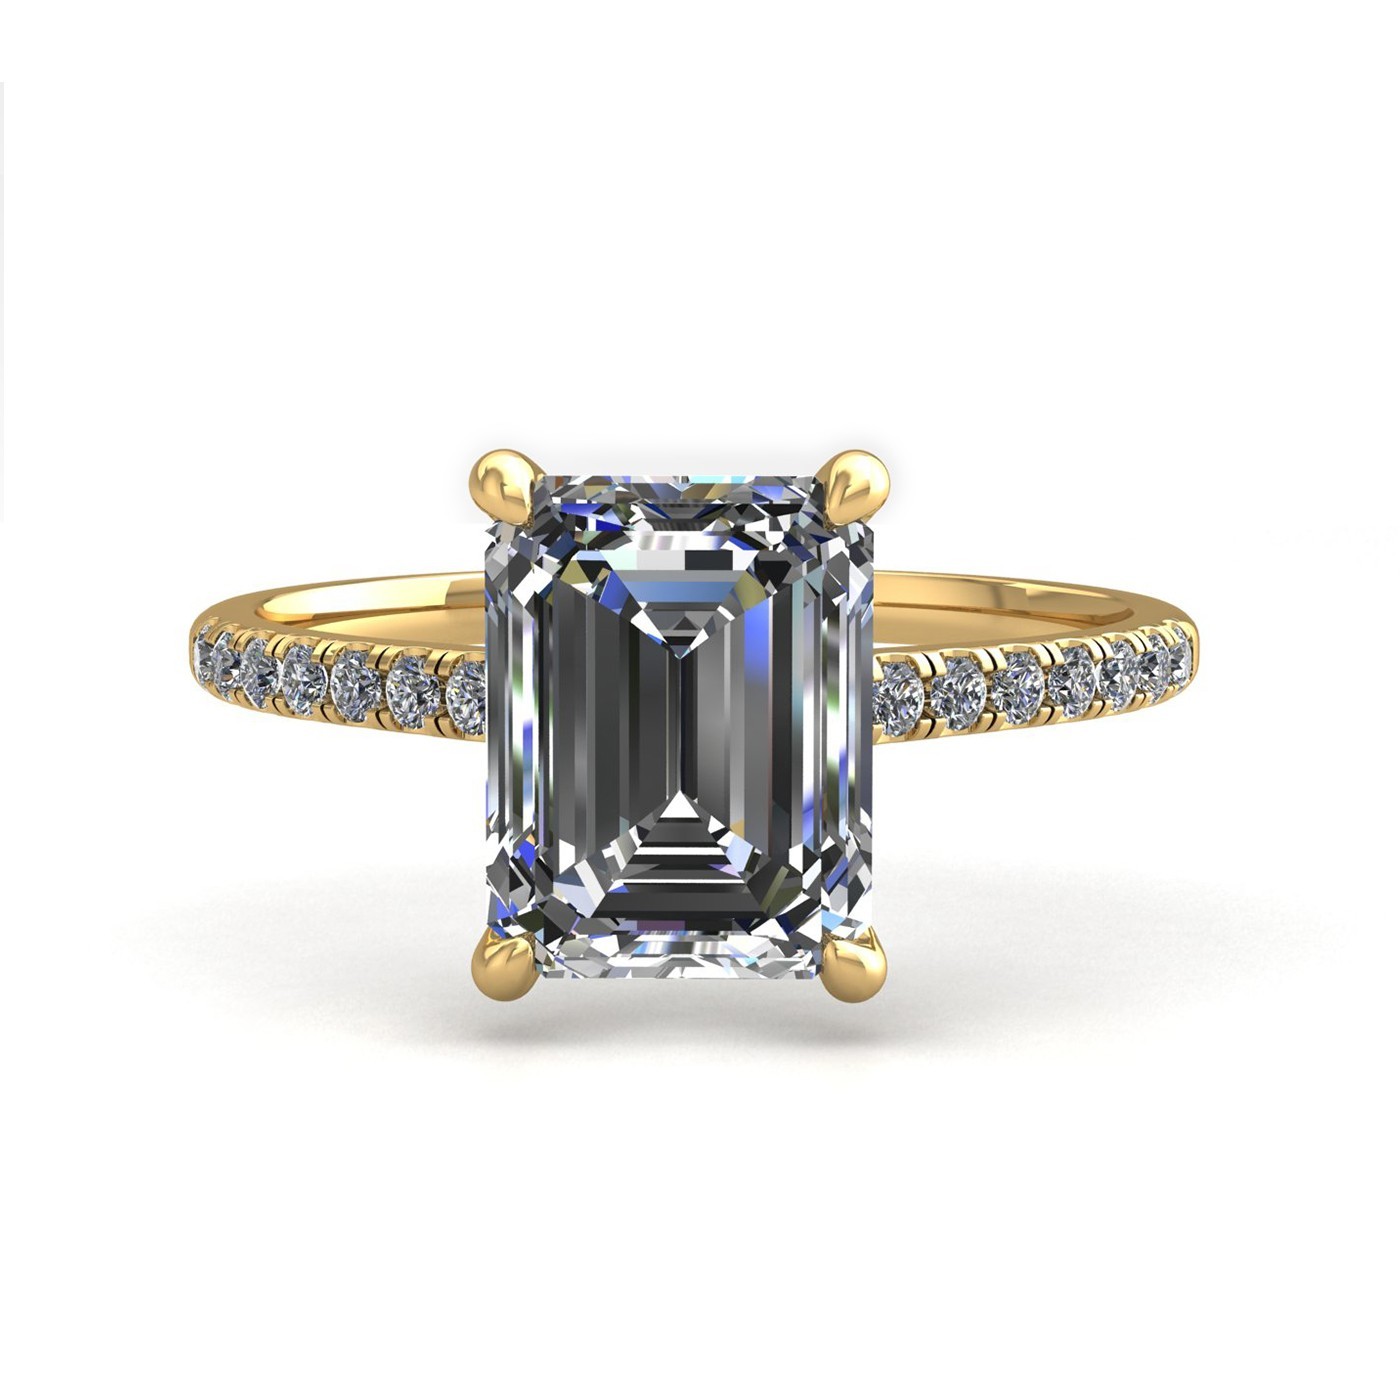 18k yellow gold 1.2ct 4 prongs emerald cut diamond engagement ring with whisper thin pavÉ set band Photos & images